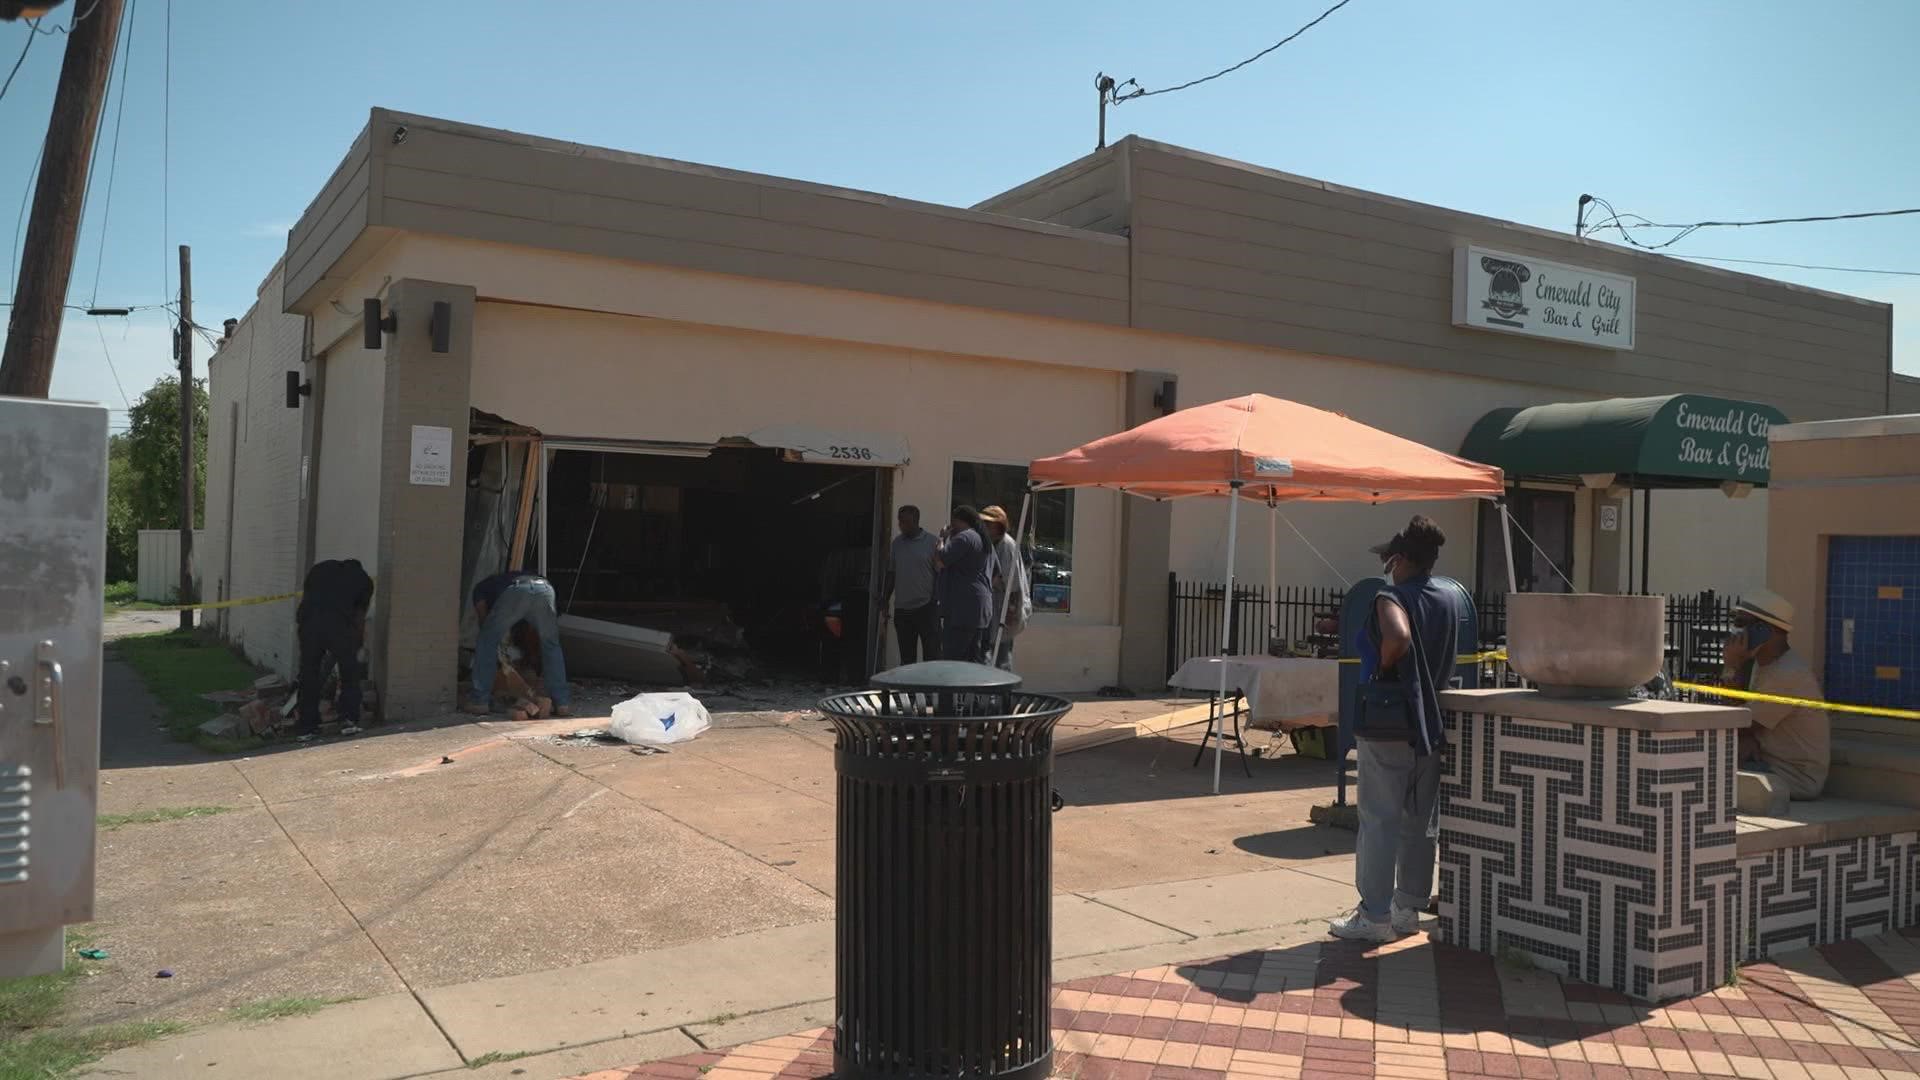 Blackjack Pizza in South Dallas vows to rebuild and reopen. The owners will need even more community support to get there.